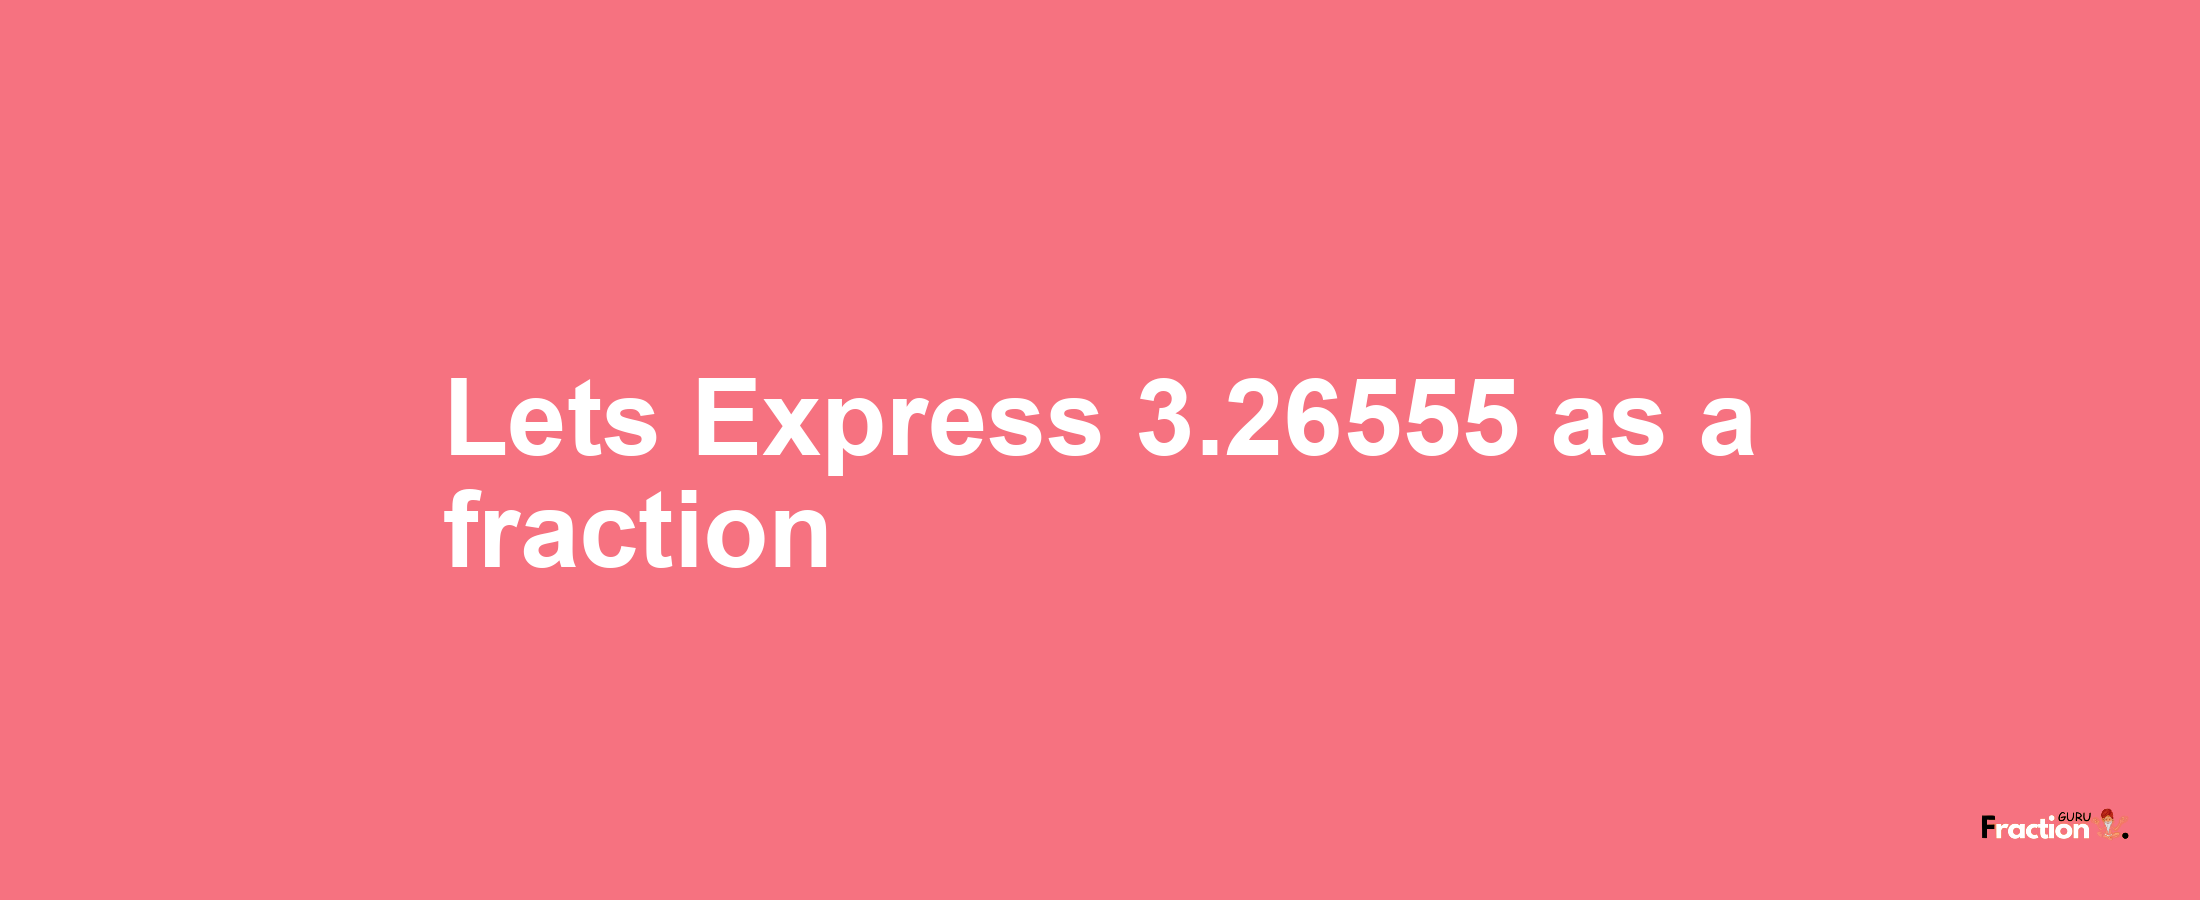 Lets Express 3.26555 as afraction